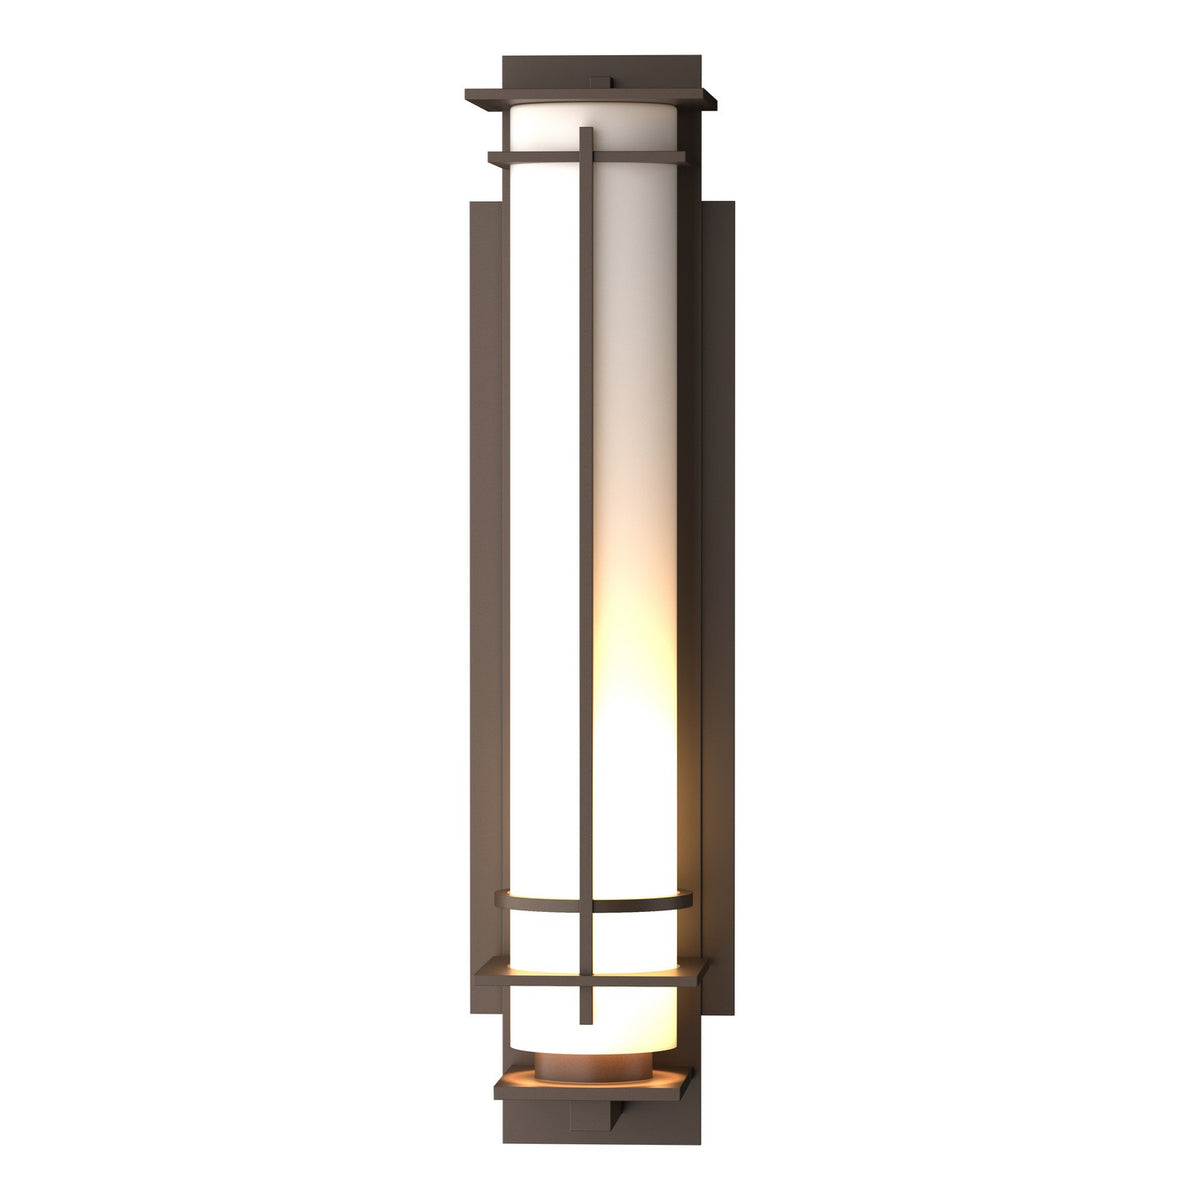 Hubbardton Forge - 307861-SKT-75-GG0189 - One Light Outdoor Wall Sconce - After Hours - Coastal Bronze